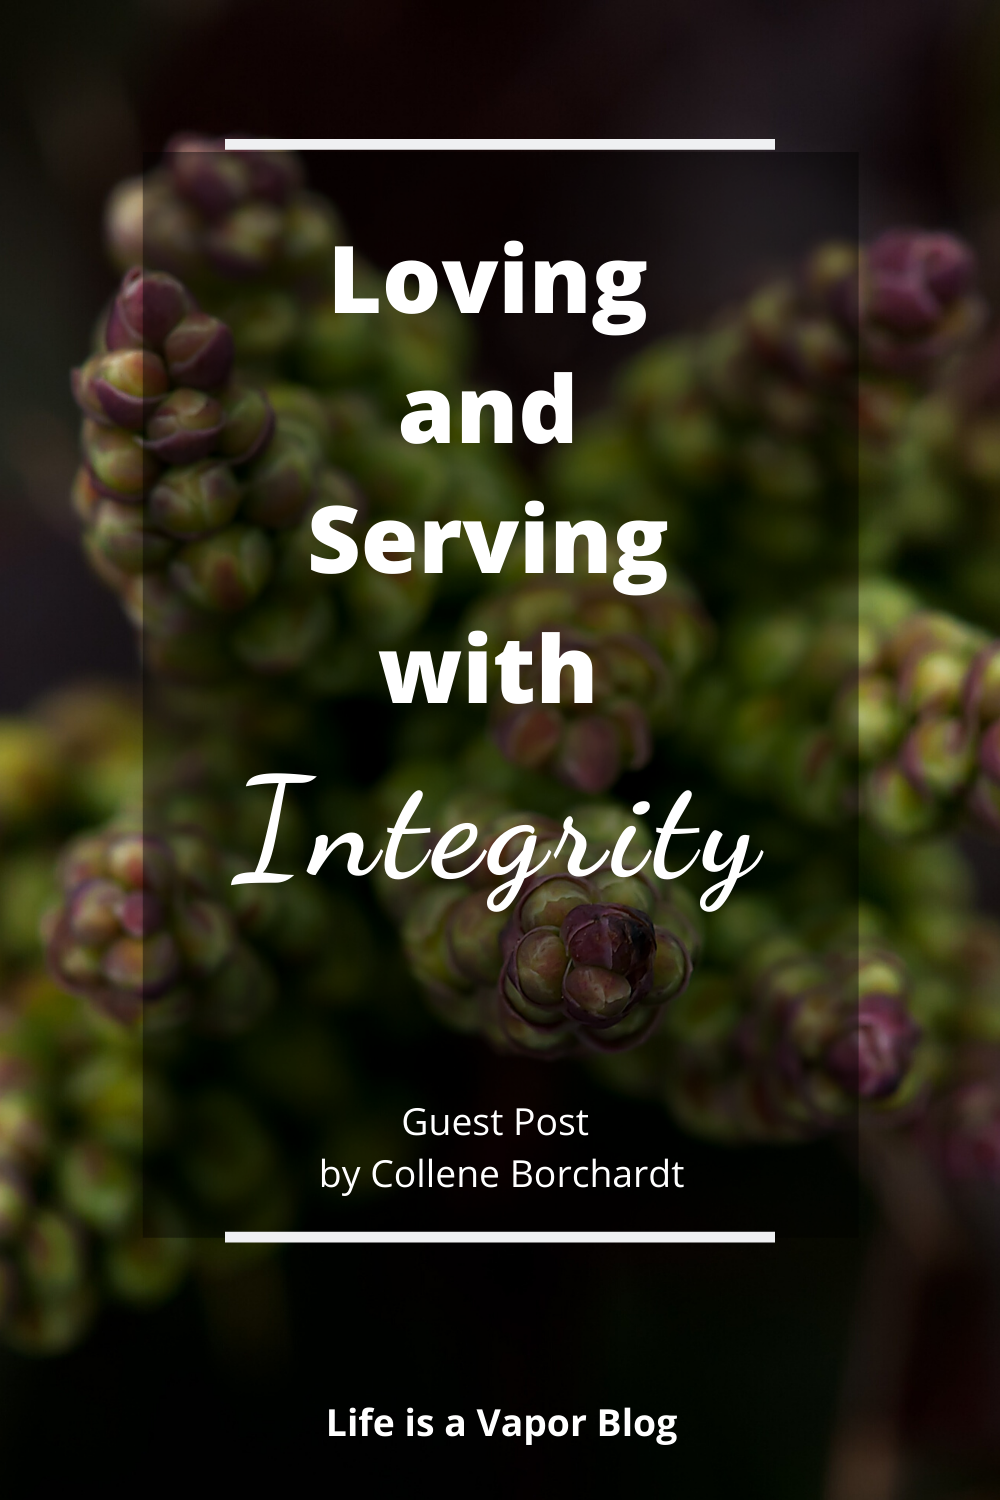 Loving and serving with integrity